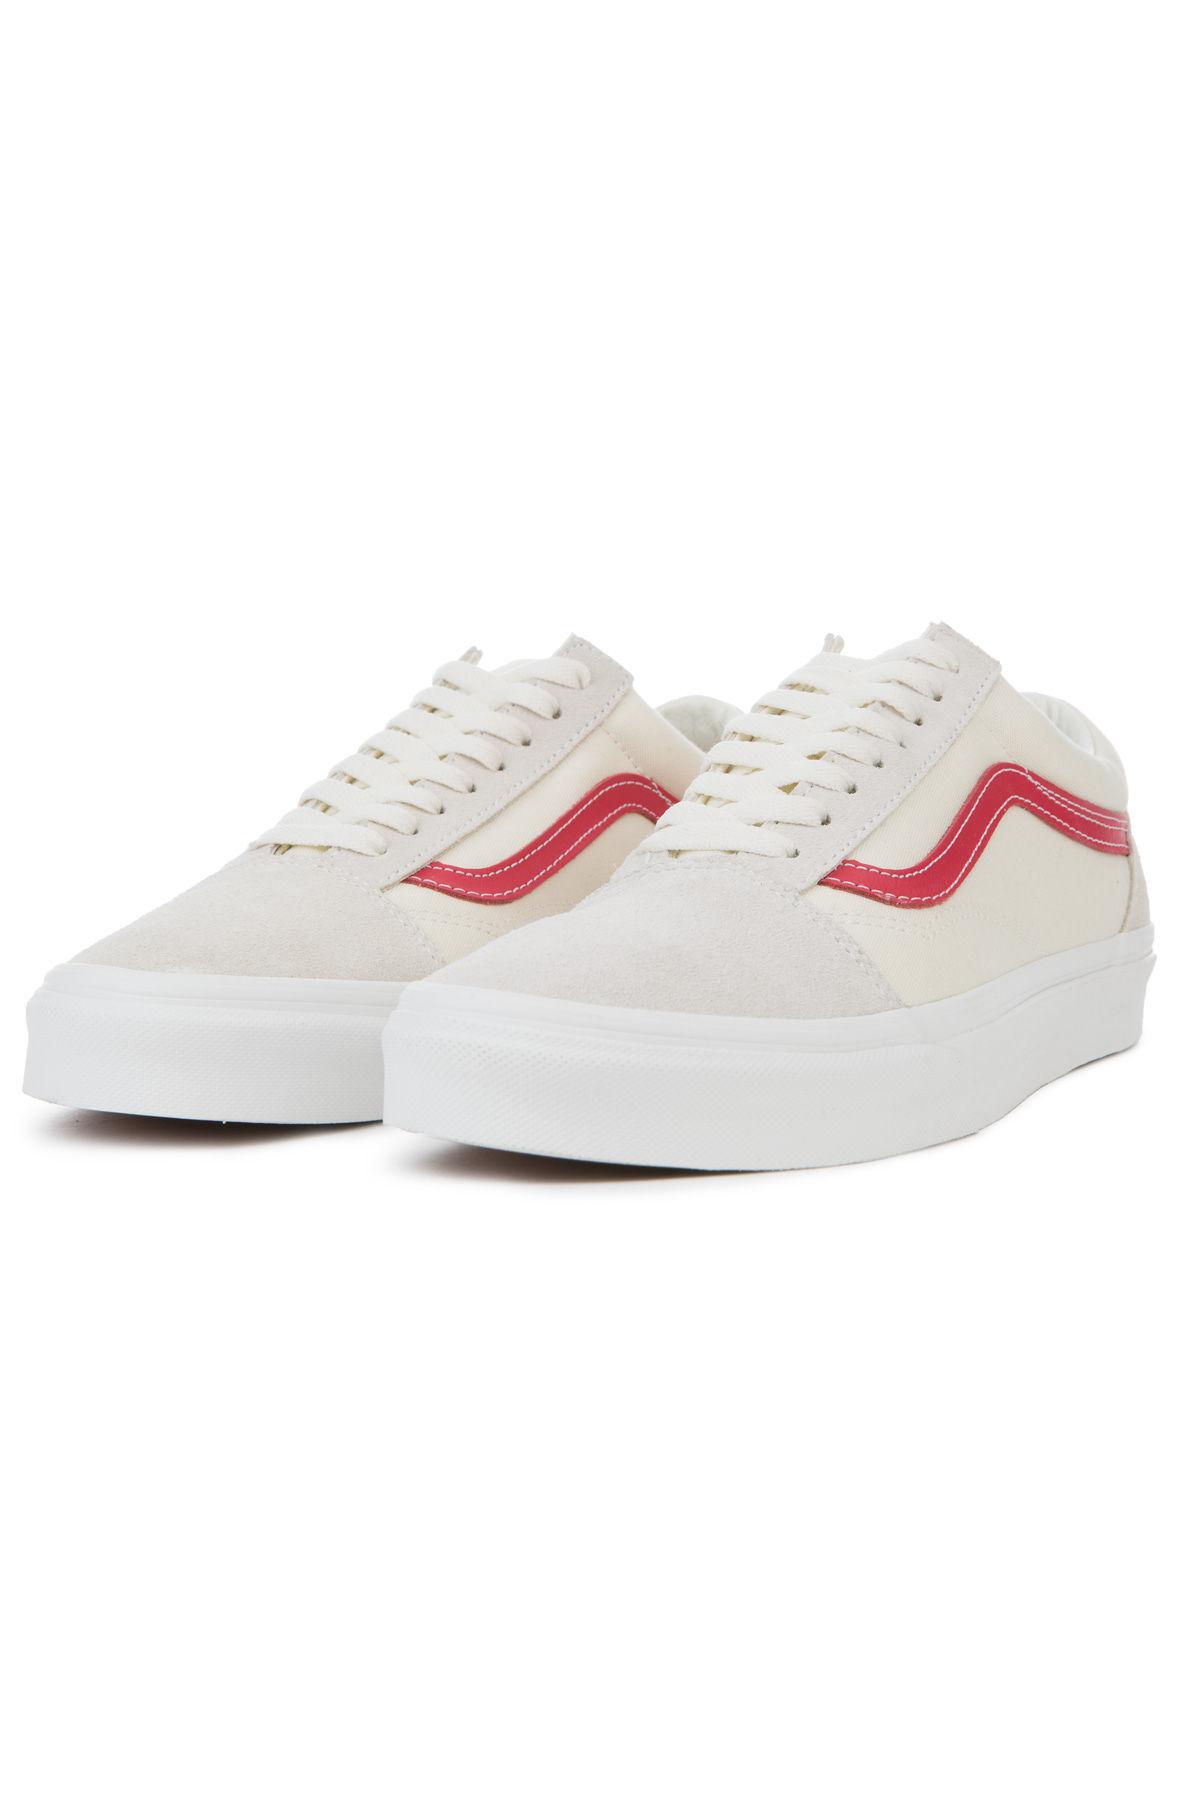 white vans with red stripe,OFF 54%www.jtecrc.com